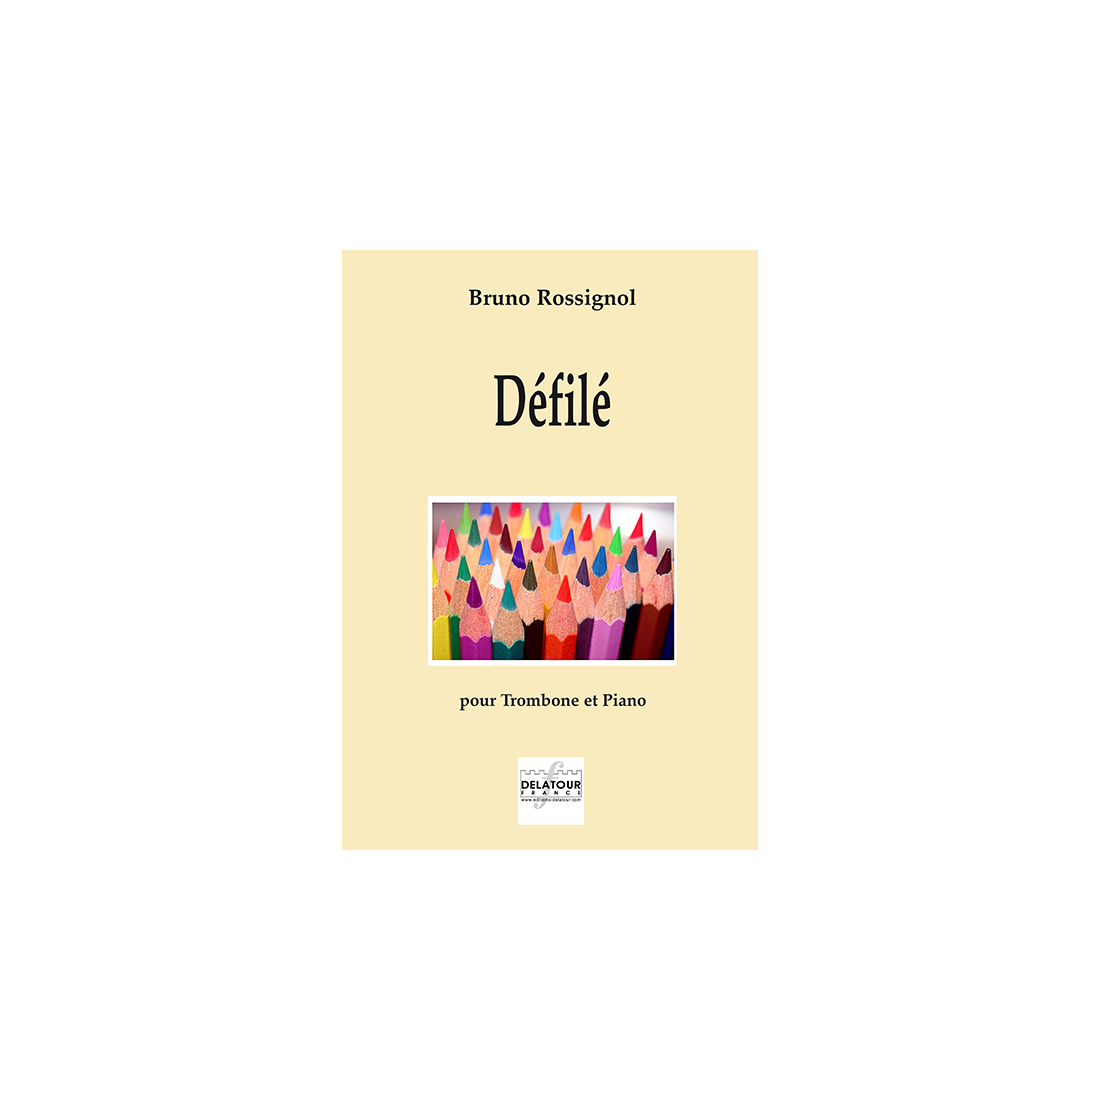 Défilé for trombone and piano